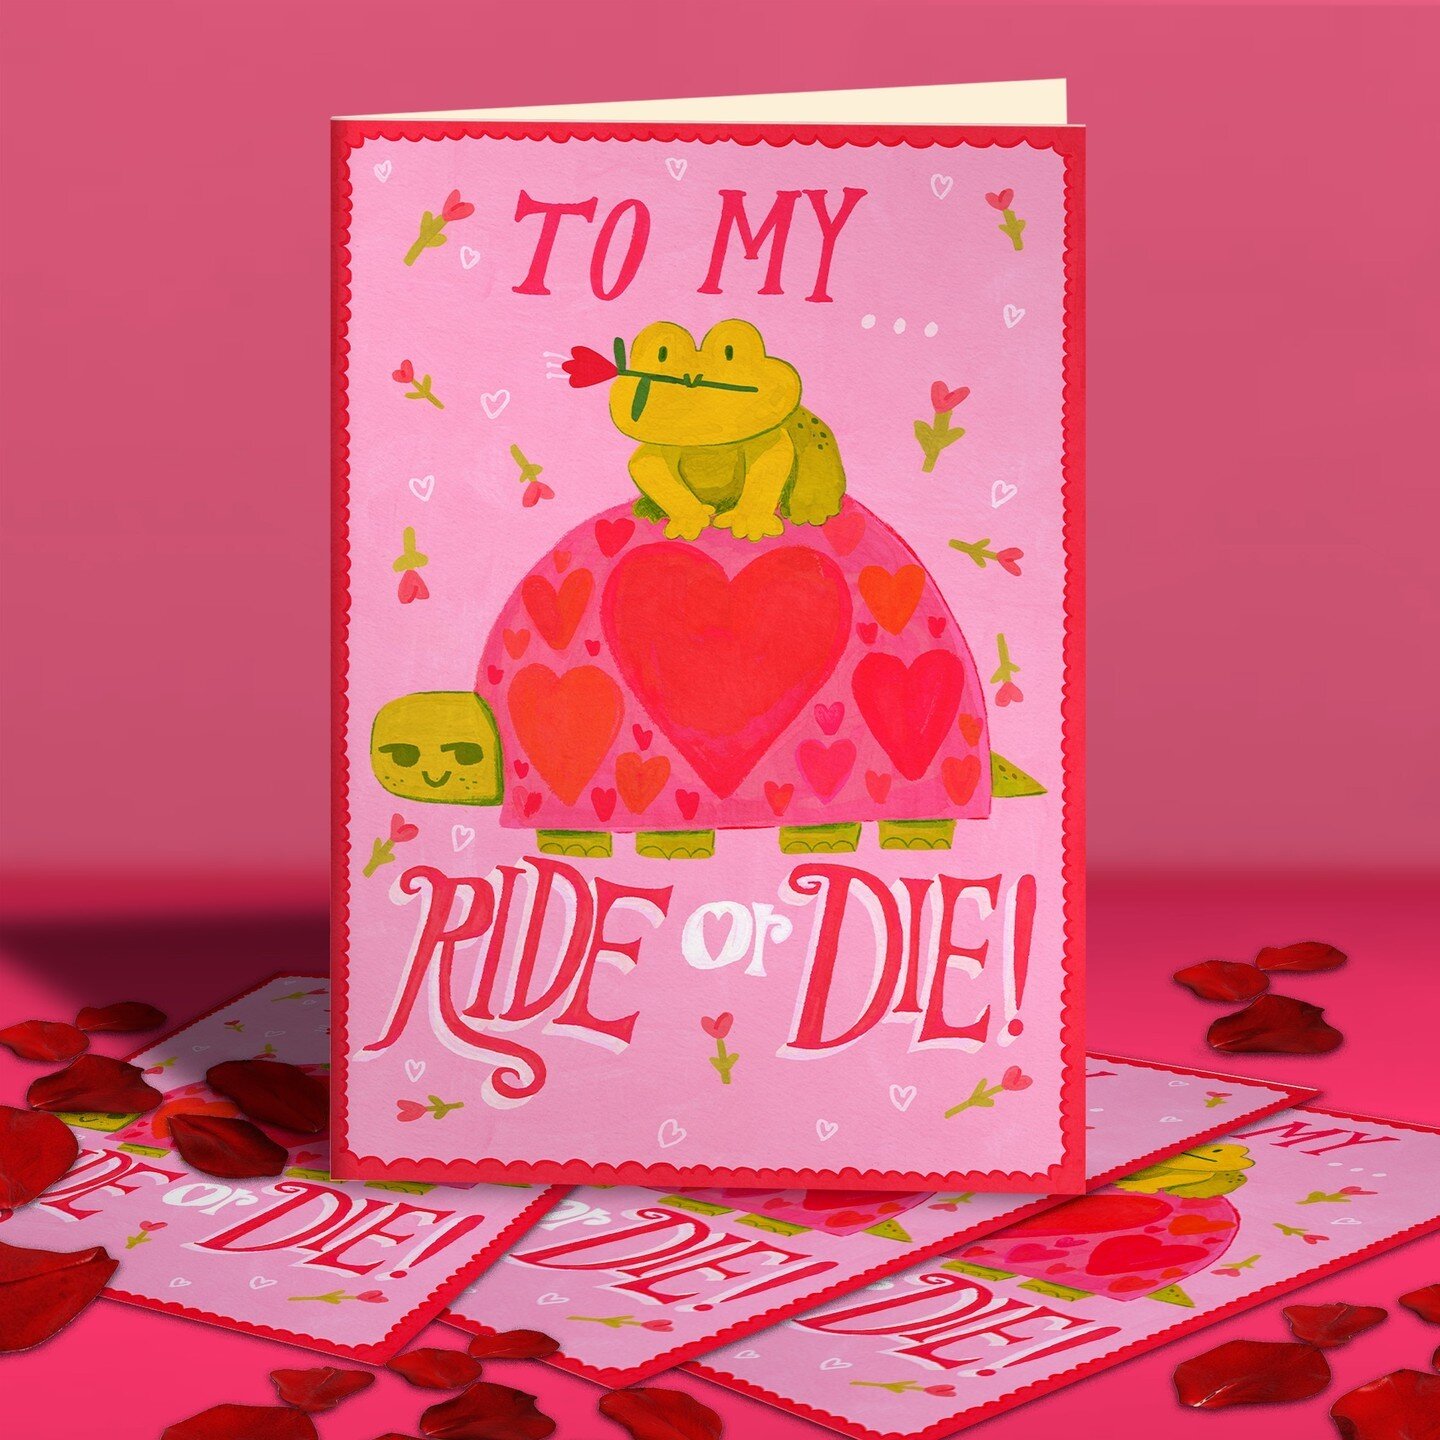 🐸💗🐢 Who's your ride or die? ⁠
⁠
How do you show up for your loved ones? ⁠
⁠
Sometimes it's as simple as unloading the dishwasher or giving your friend a ride to the airport.⁠
⁠
#surfacedesign #illustration #surtex #painting #goauche #supportlocala